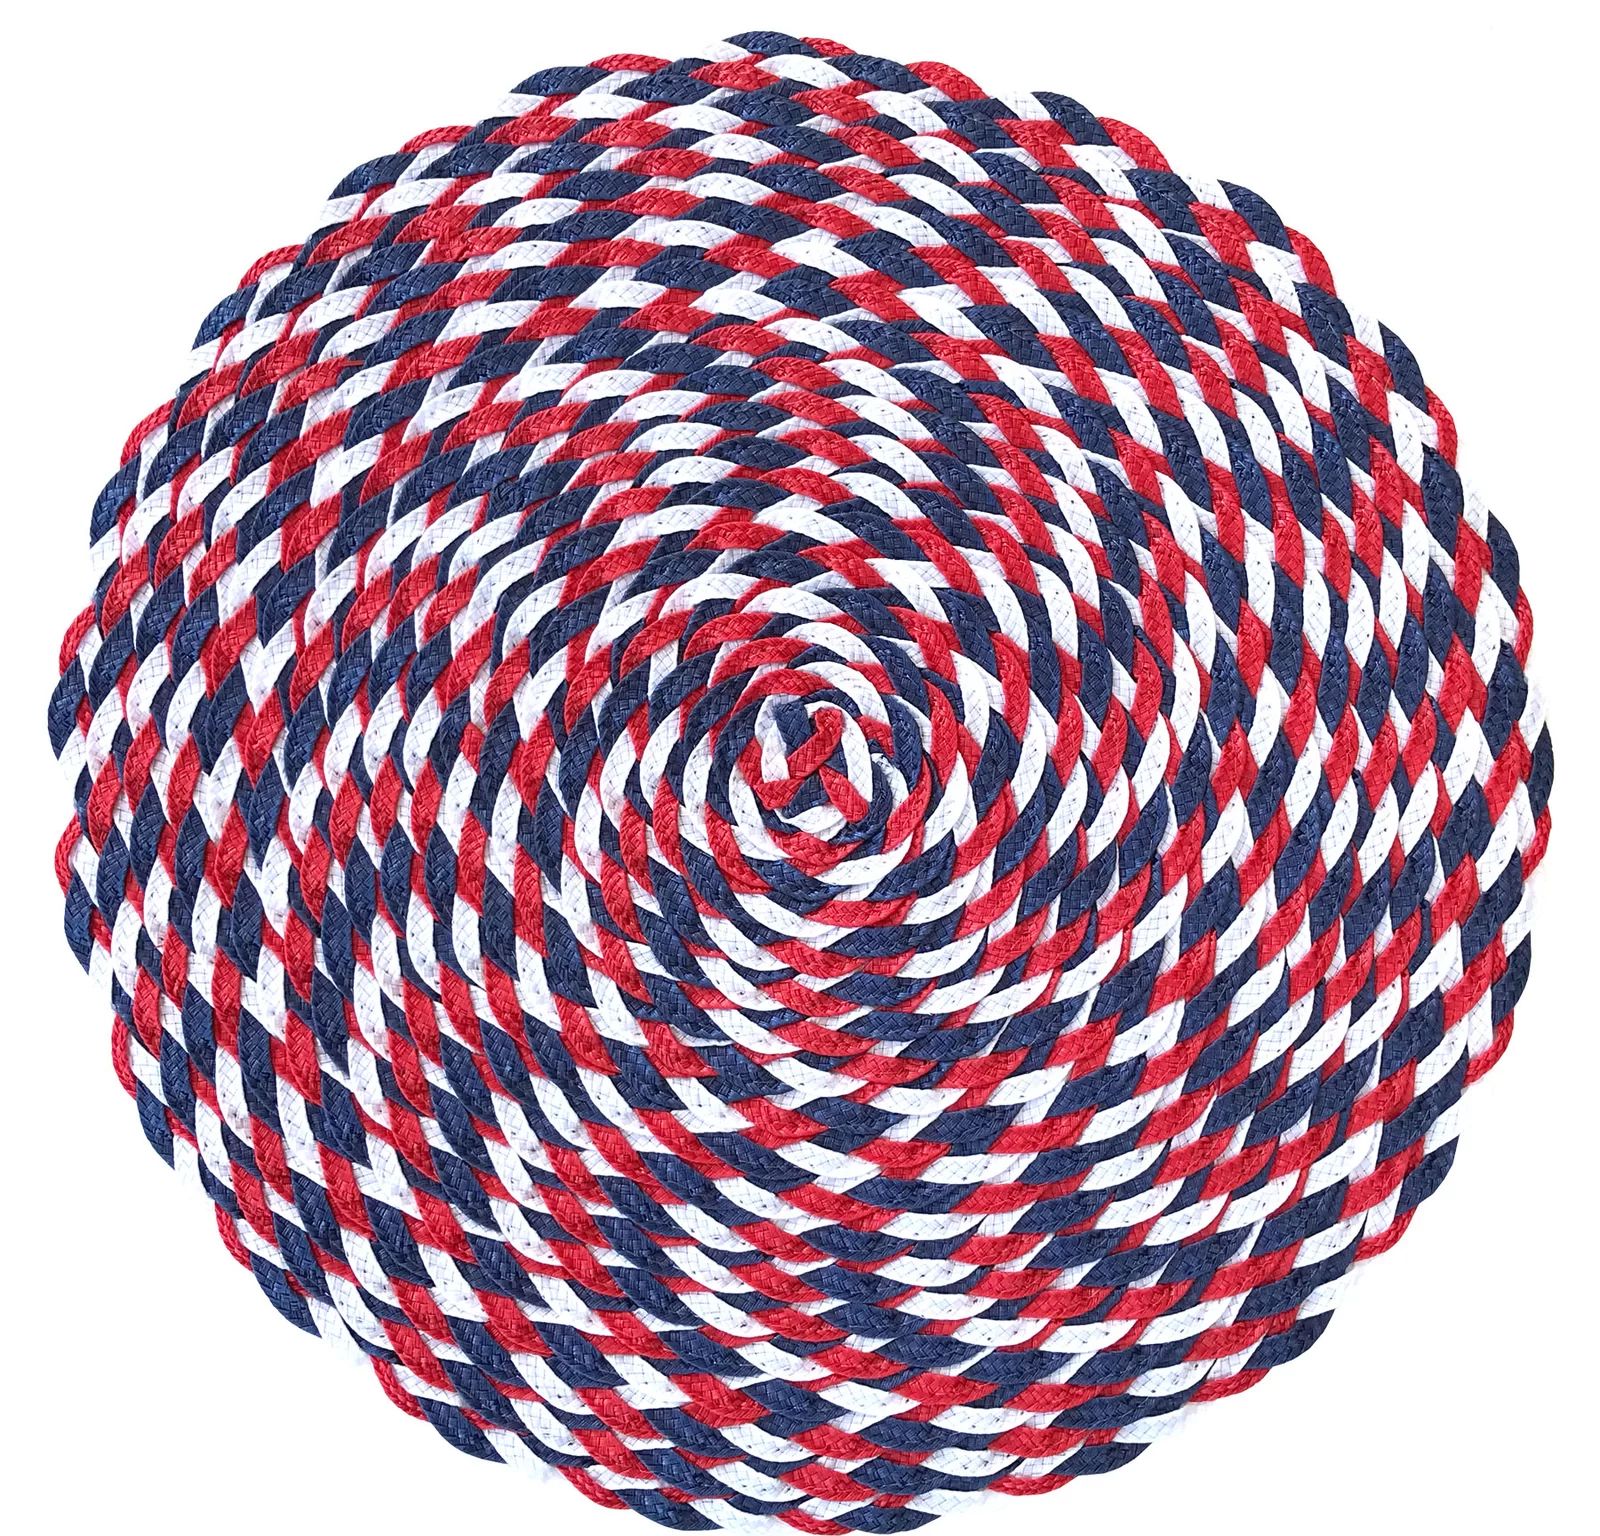 Schexnayder Americana July 4th Round Braided Woven 15" Placemat (Set of 6) | Wayfair North America